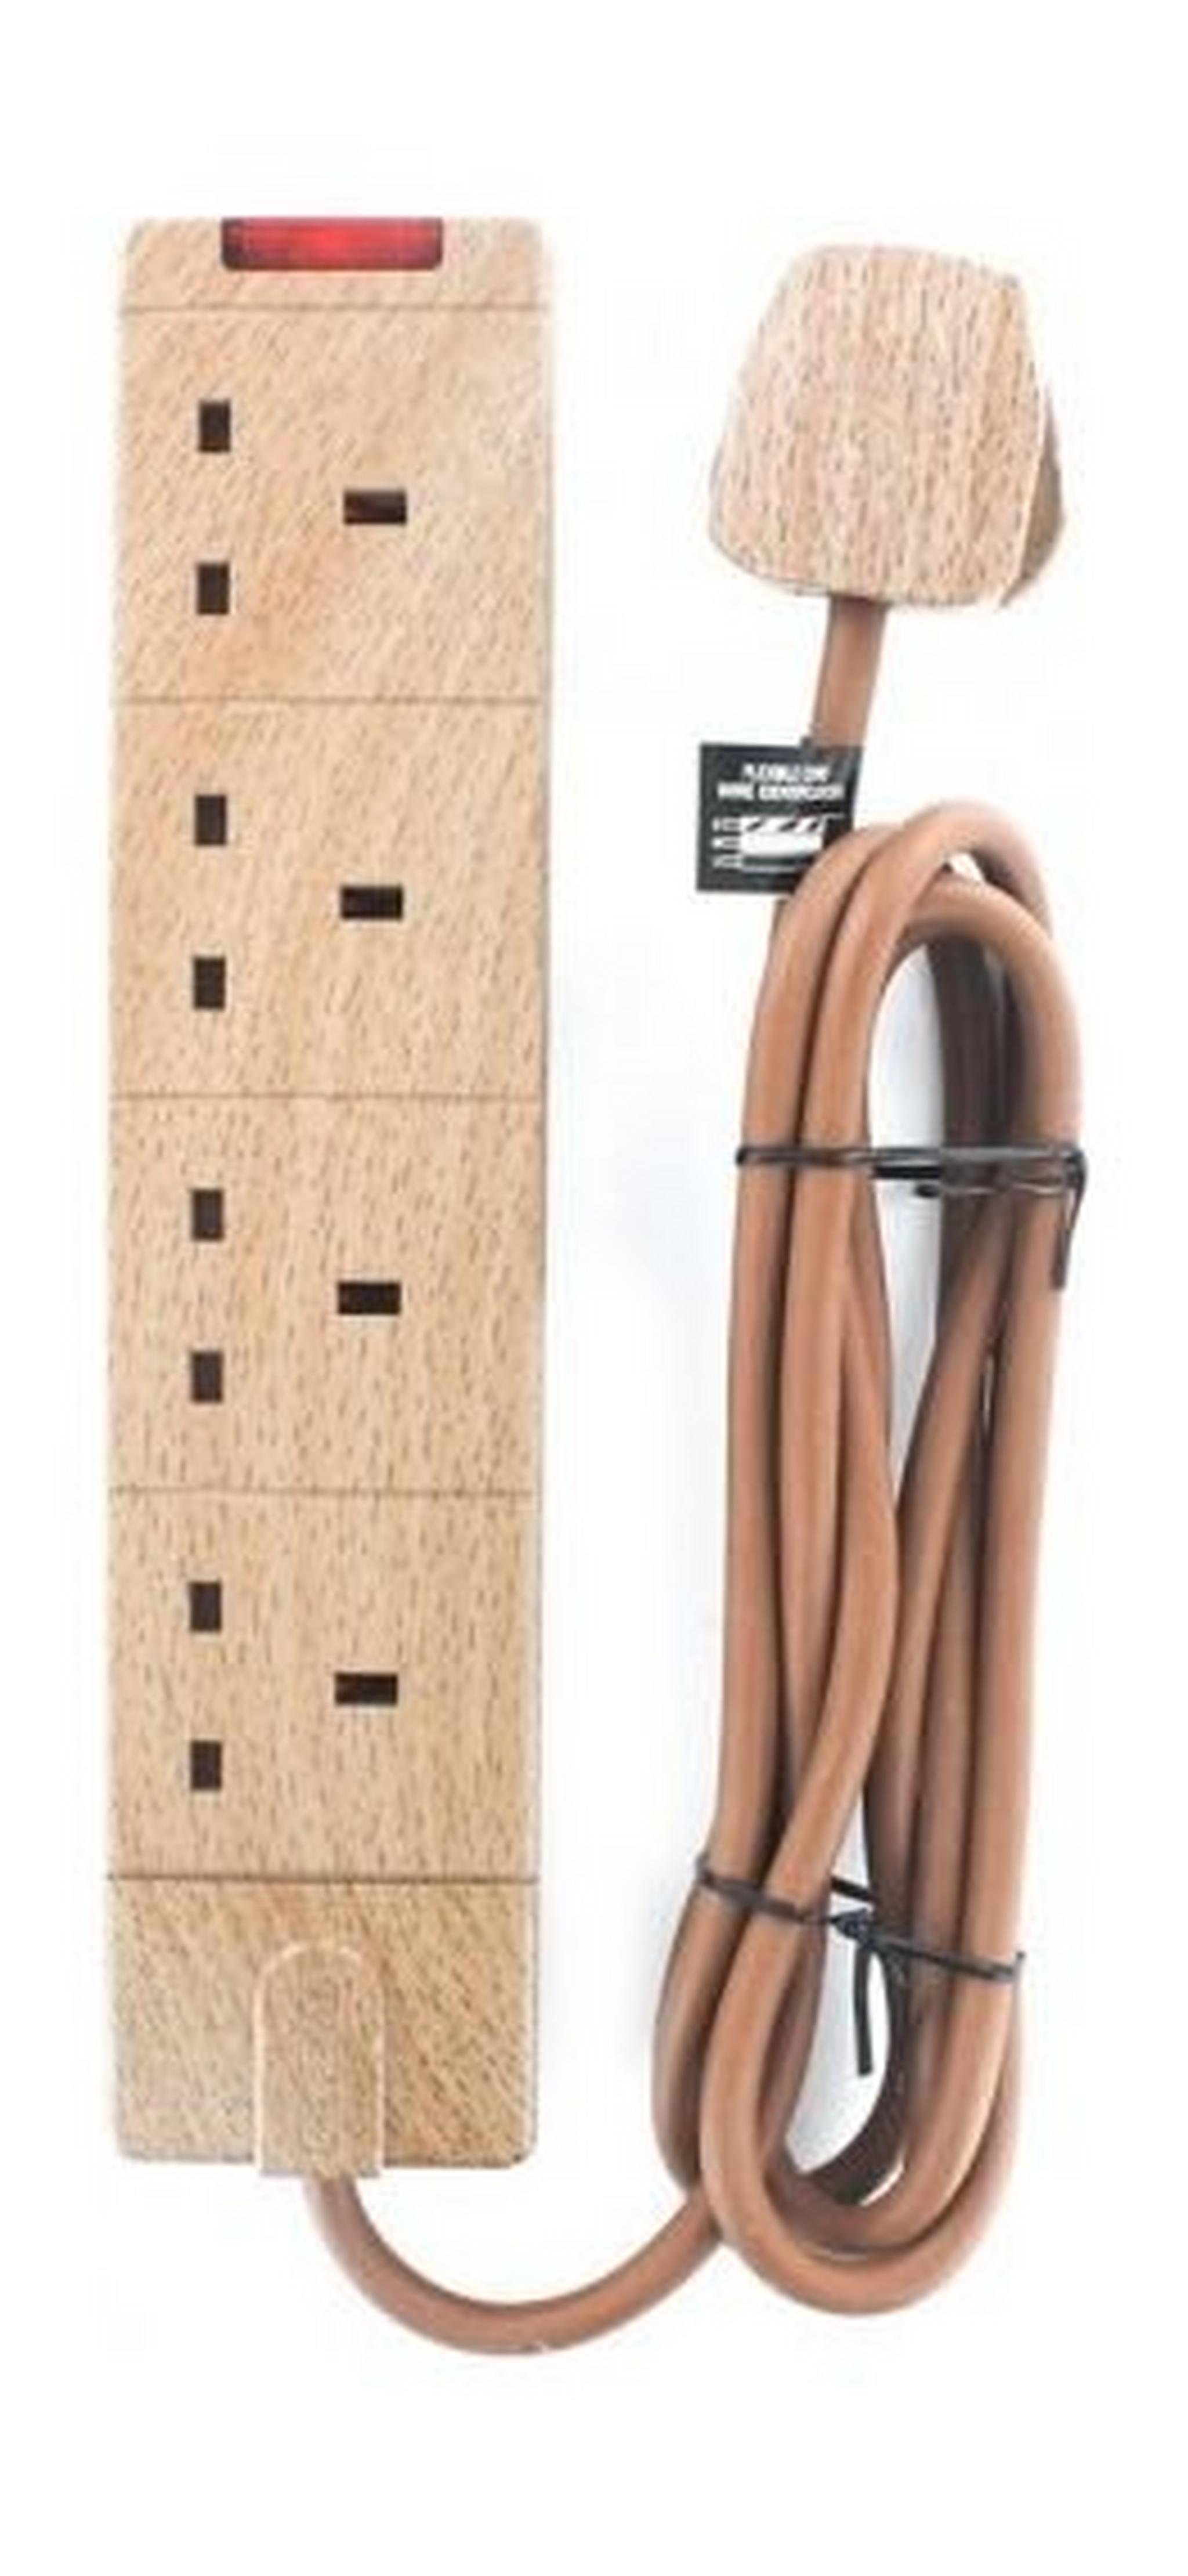 Master Plug 4-Way Surge Protected Power Socket with 2m Extension (UG2WD) - Wood Design